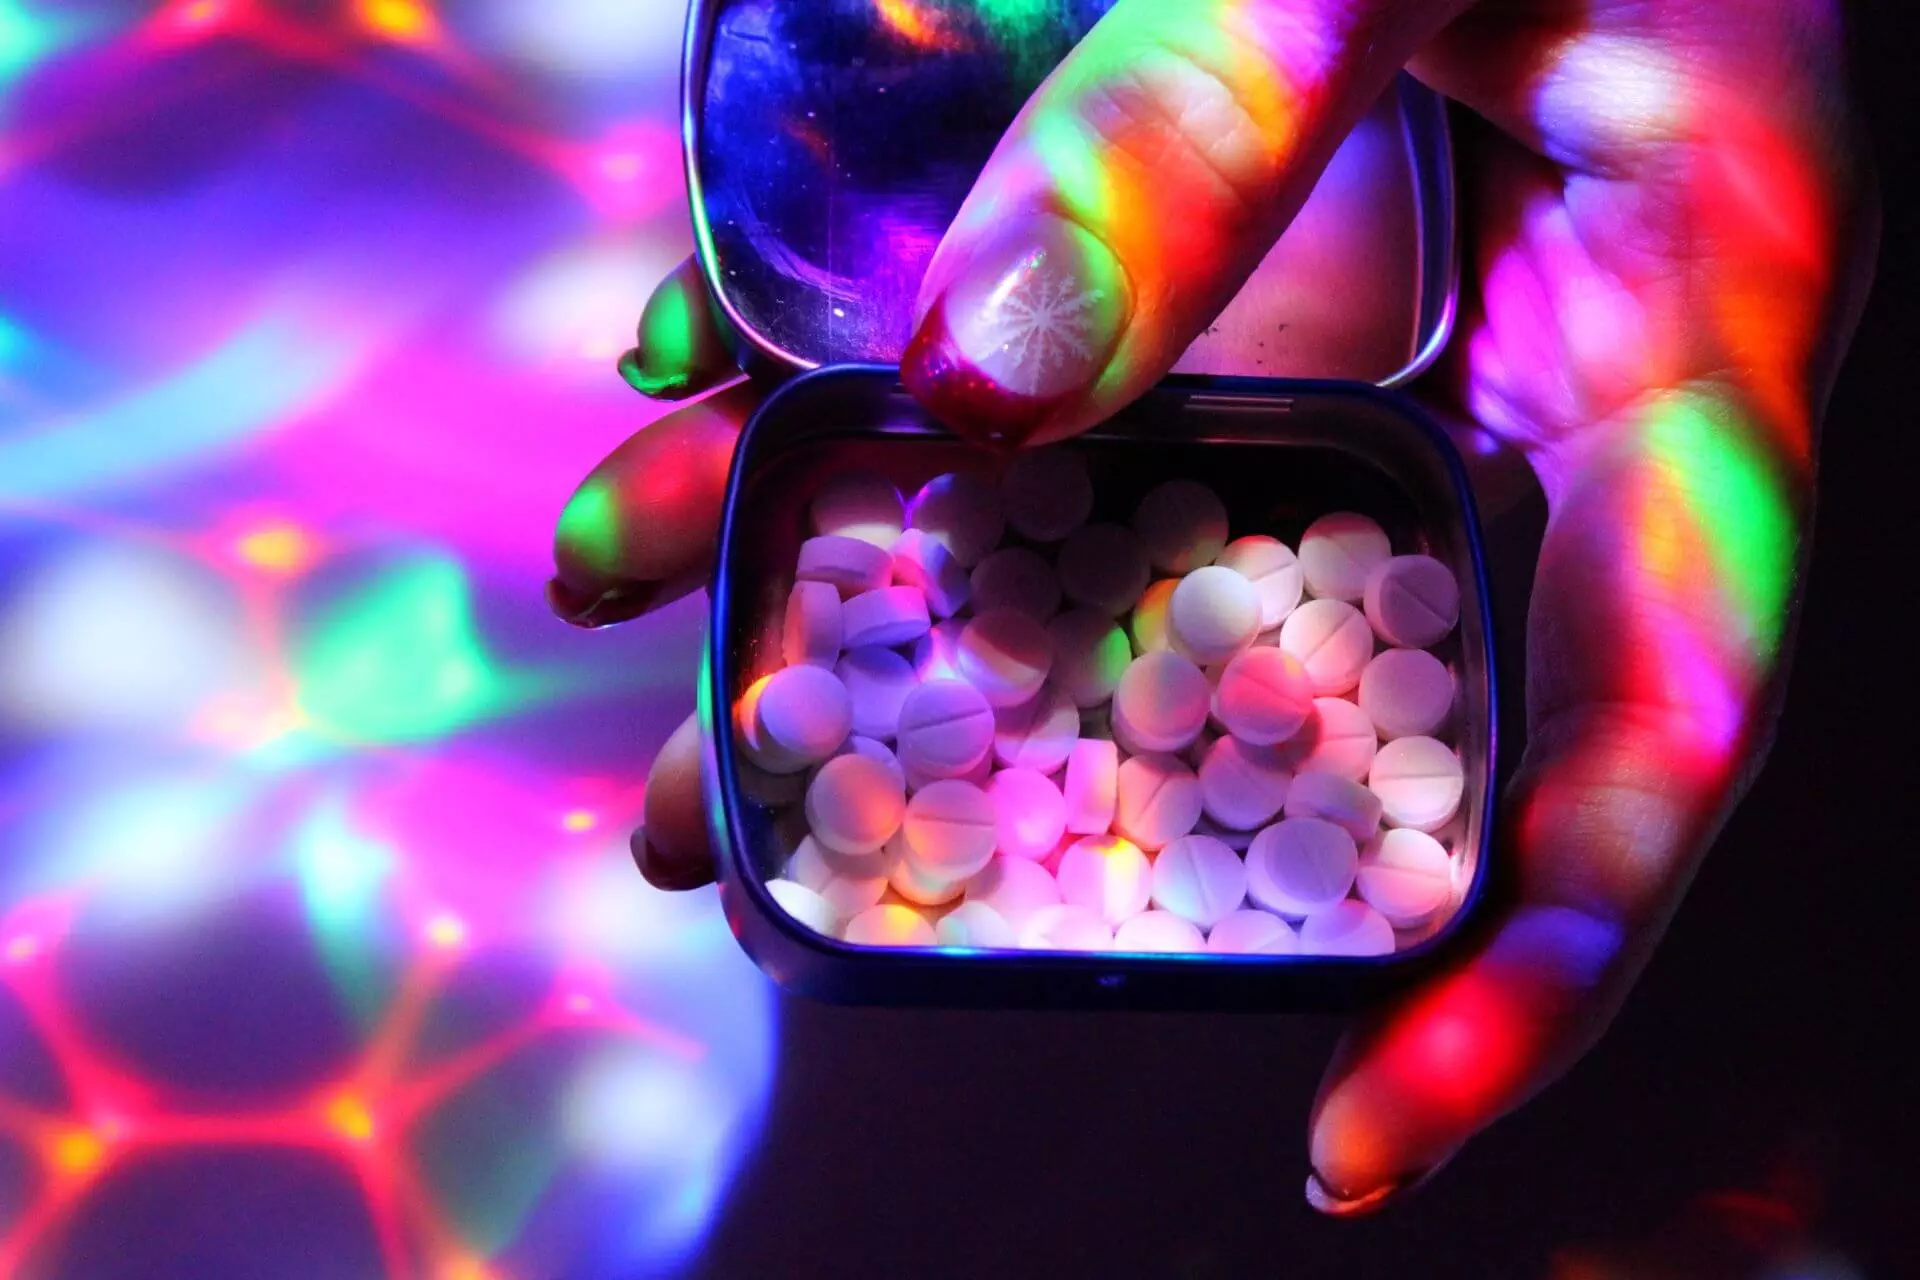 How ecstasy could help people with mental health issues pic